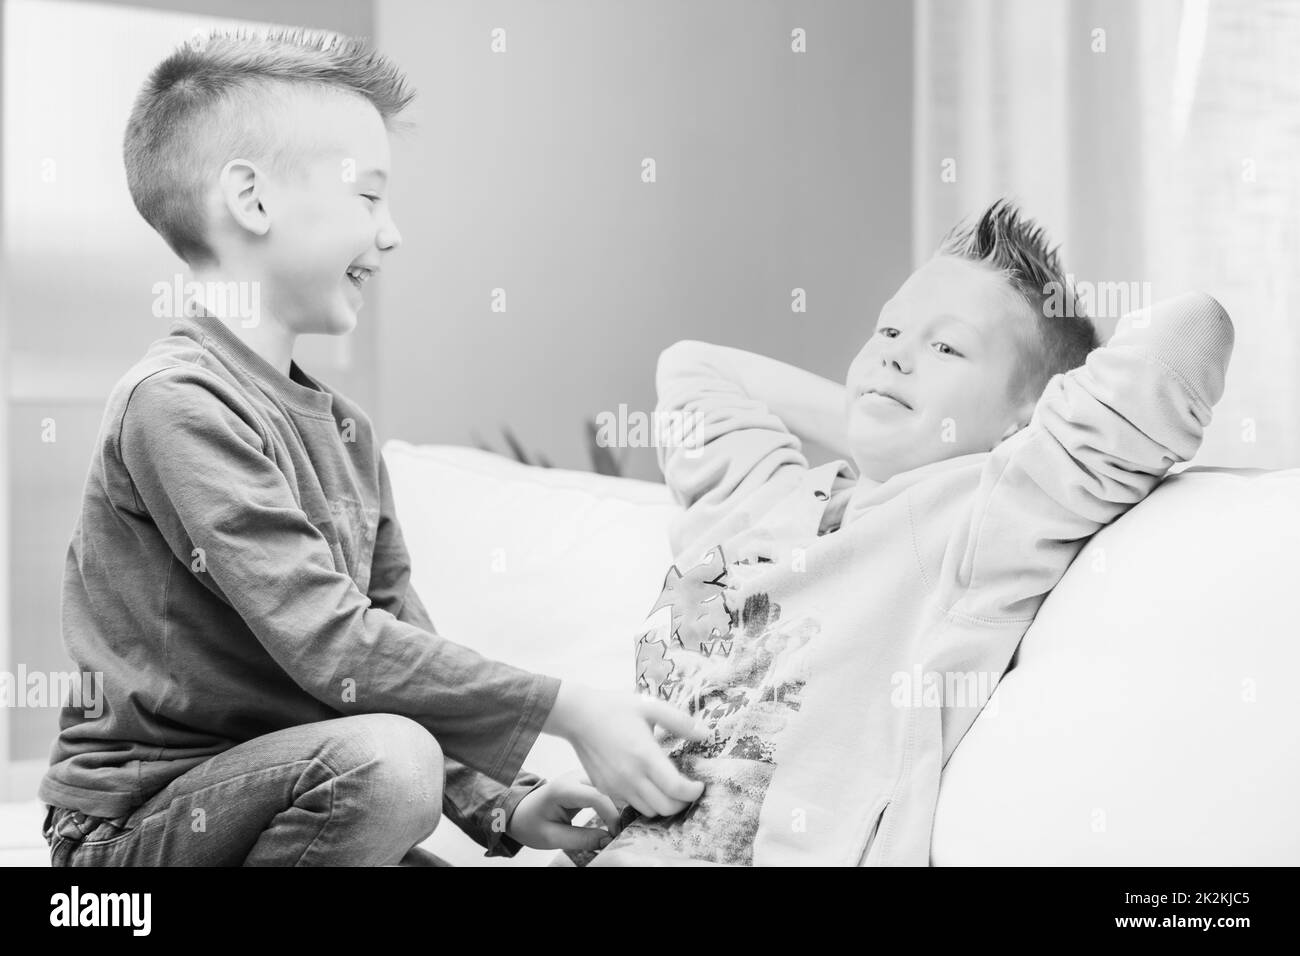 Greyscale image of two young brothers having fun Stock Photo